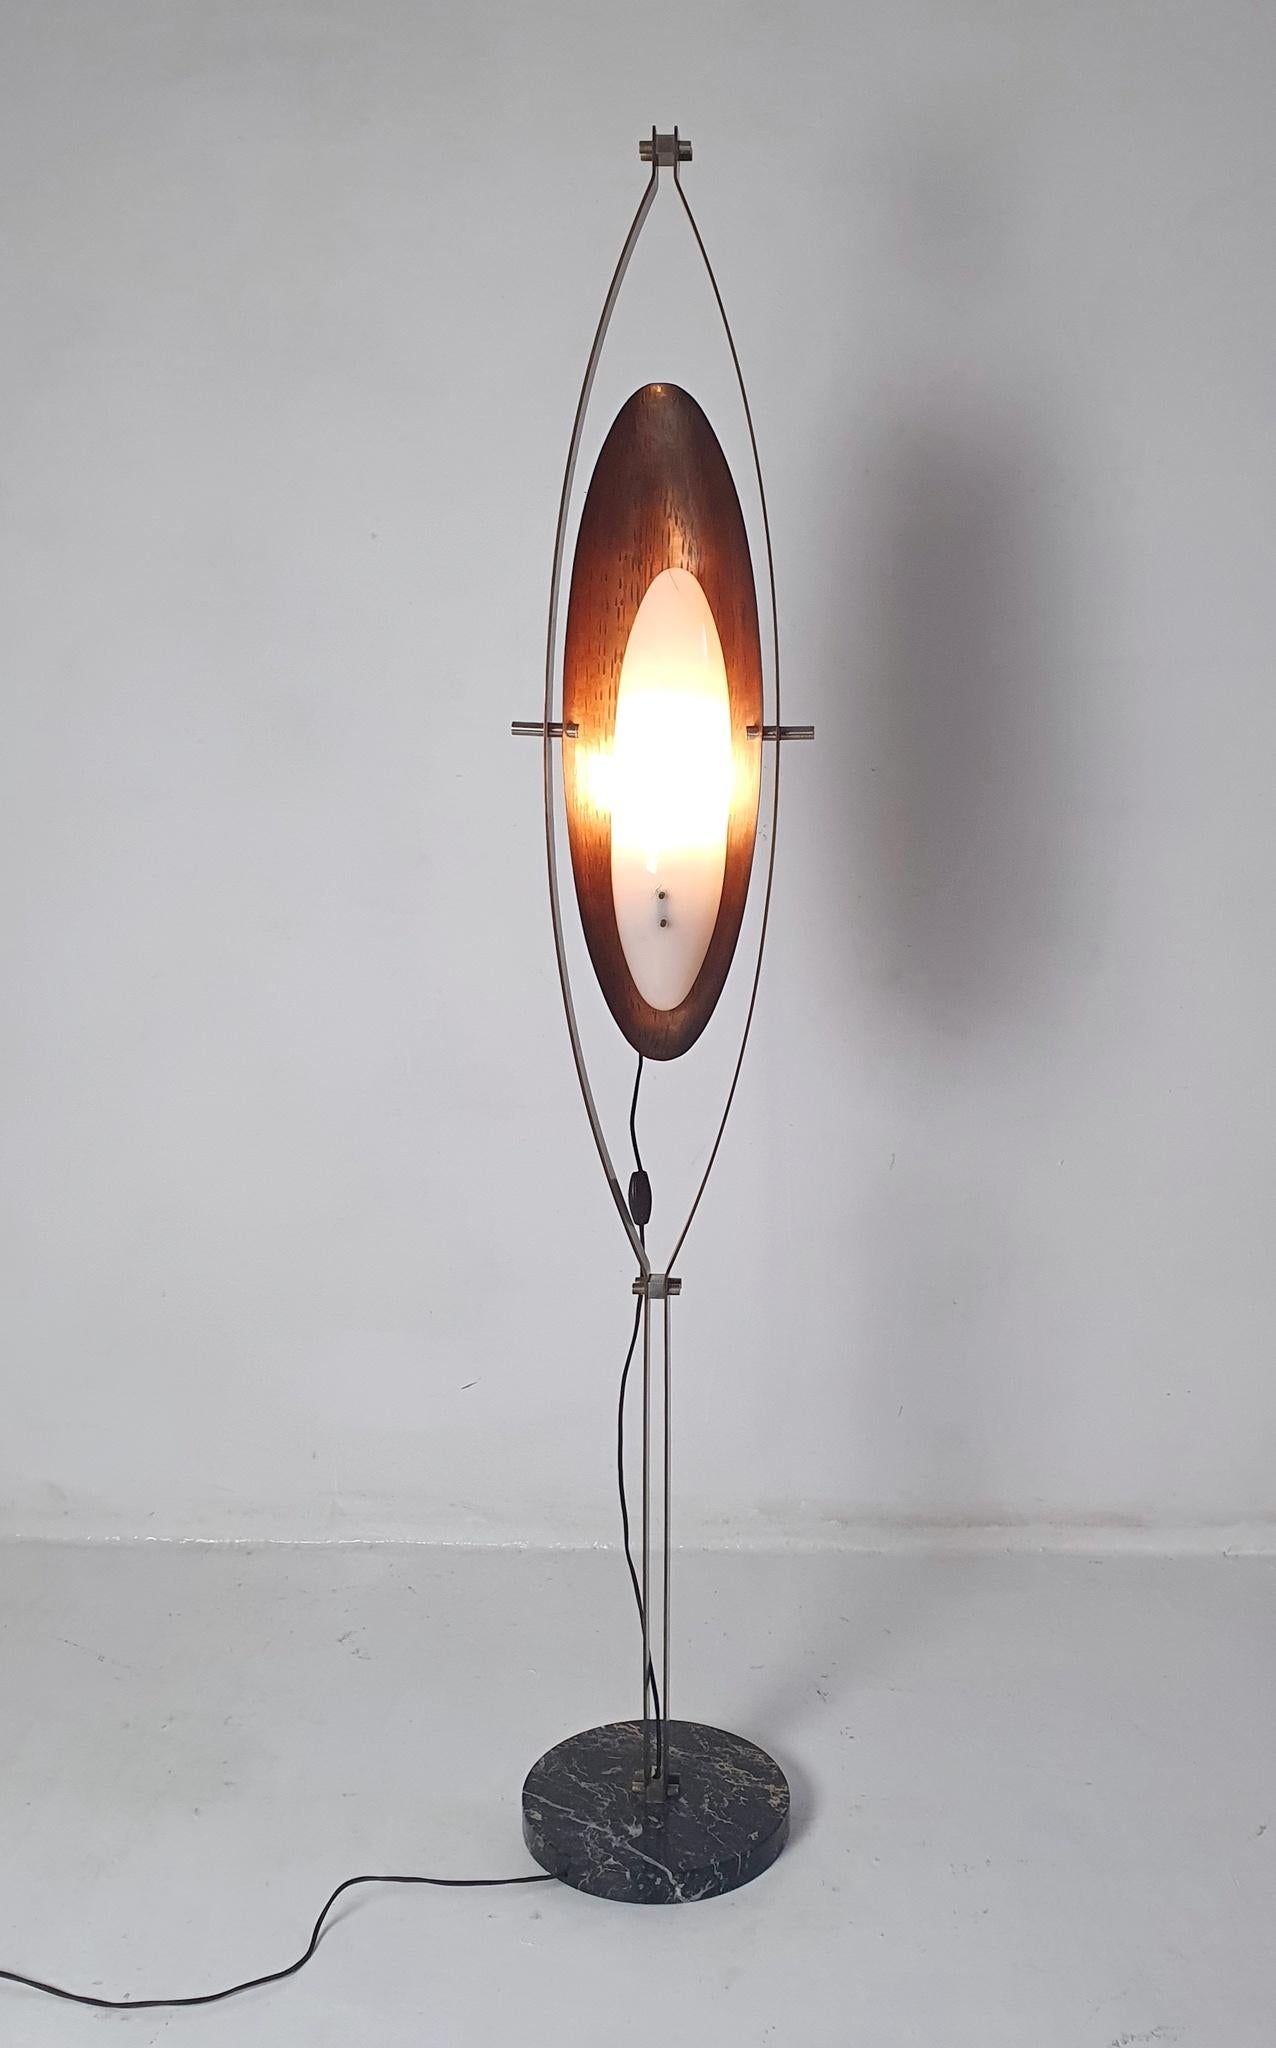  Rare floor lamp designed by Goffredo Reggiani during the 1960's. The shape of the lamp especially the copper and lucite parts should be considered especially since a production of this sort was very difficult and required a lot of specialized